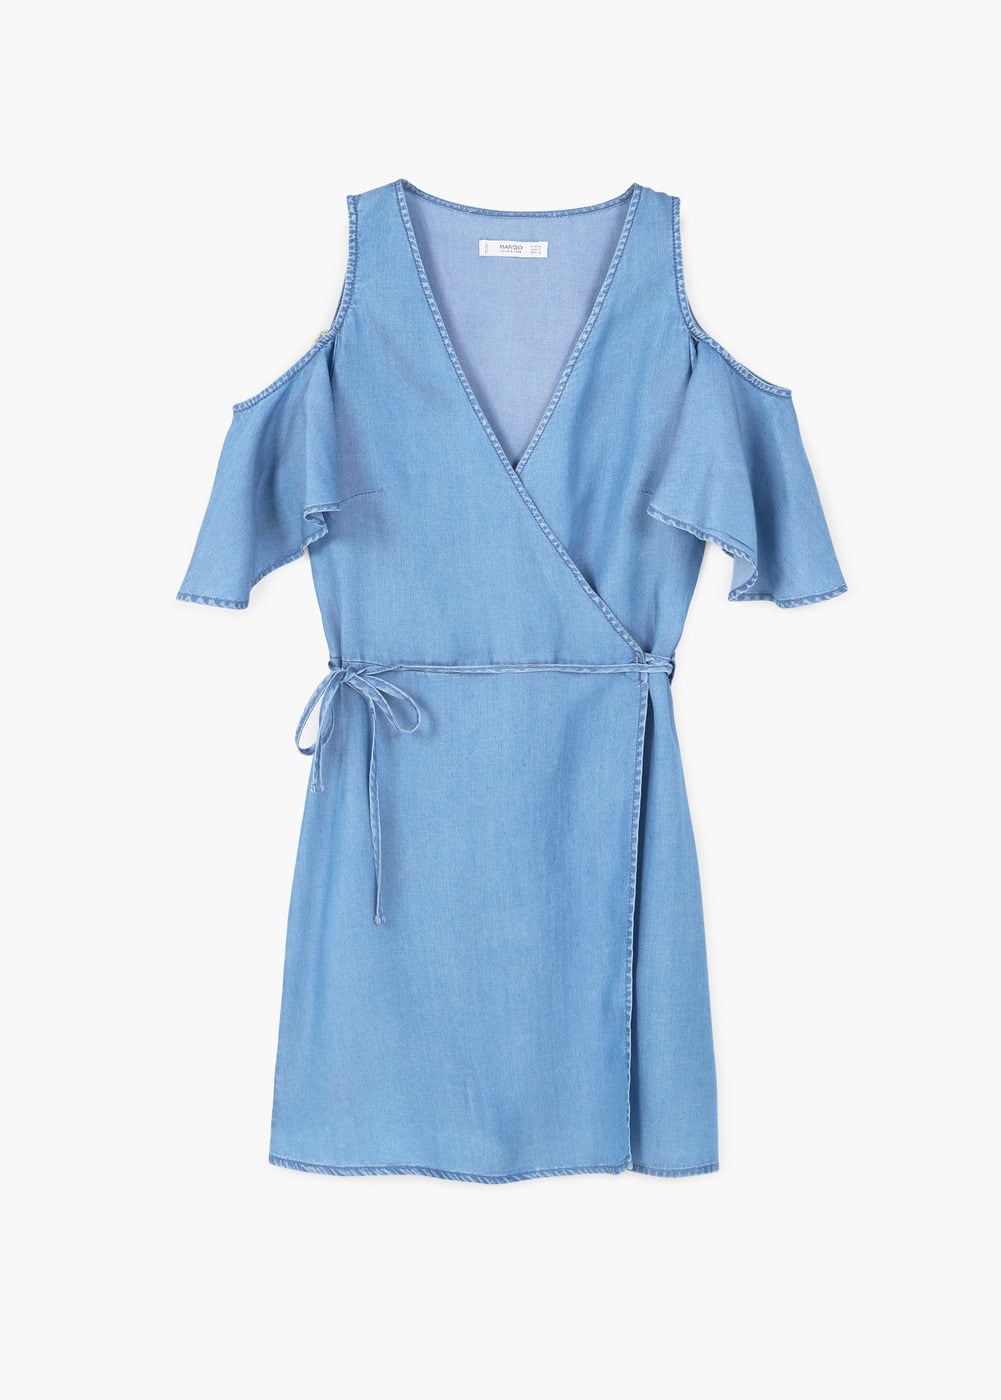 Top 15 summer dresses to rock in the sun